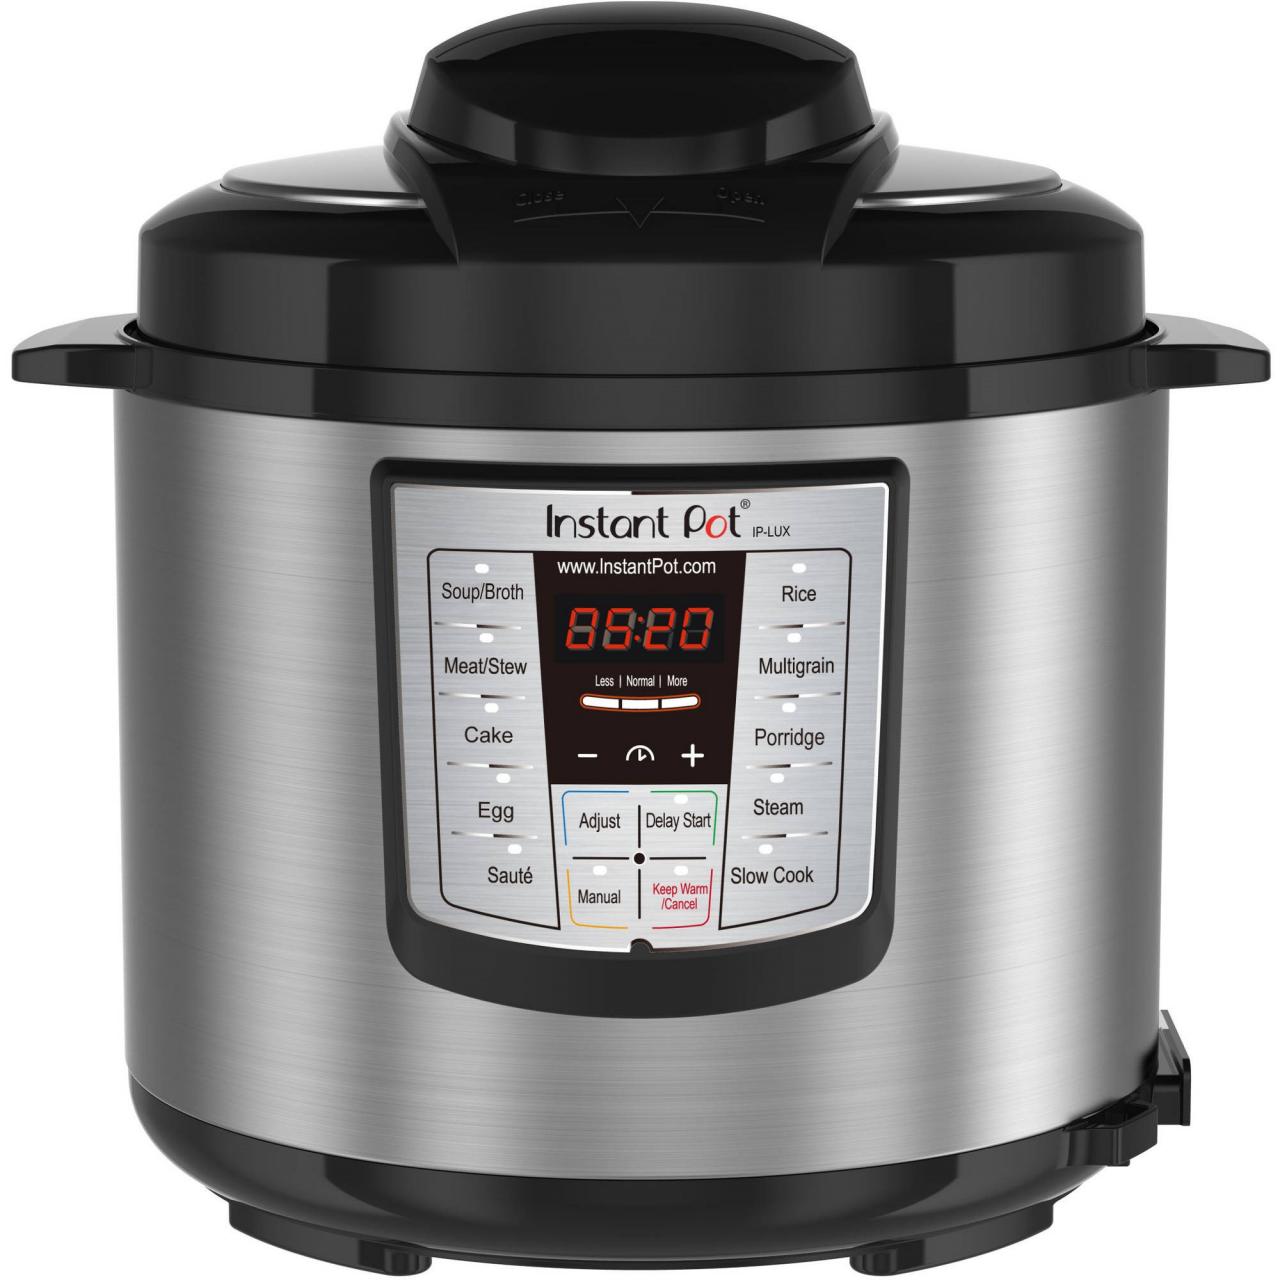 https://food.fnr.sndimg.com/content/dam/images/food/products/2019/6/21/rx_instant-pot-lux60-6-qt-6-in-1-multi-use-programmable-pressure-cooker-slow-cooker-rice-cooker-saut-steamer-and-warmer.jpeg.rend.hgtvcom.1280.1280.suffix/1561131899671.jpeg